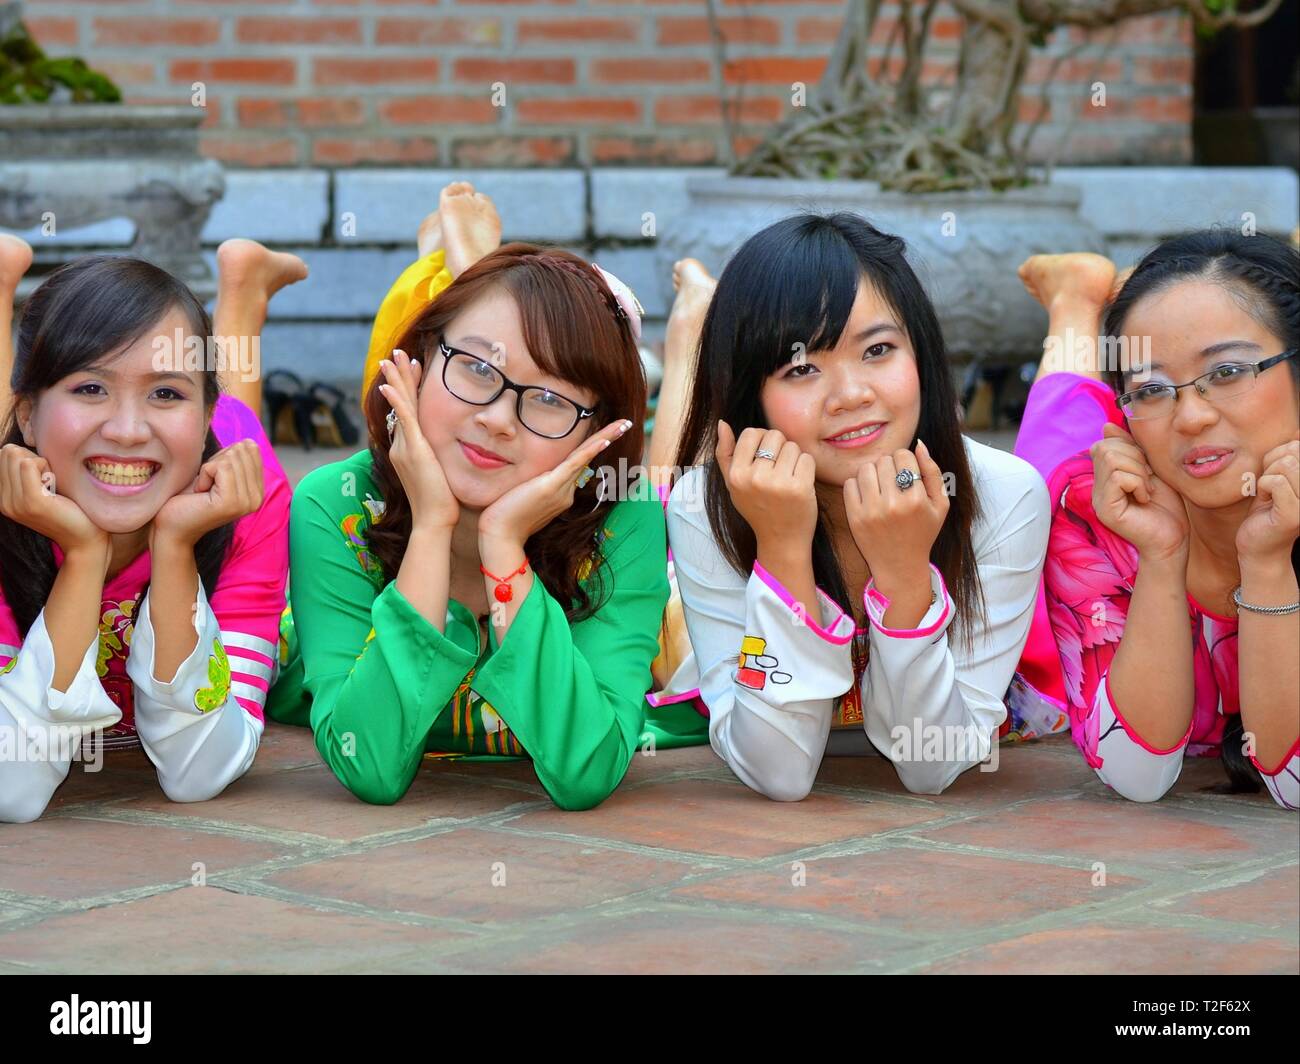 Four dressed-up Vietnamese girls in a prone position rest their heads on their hands and look at the camera. Stock Photo